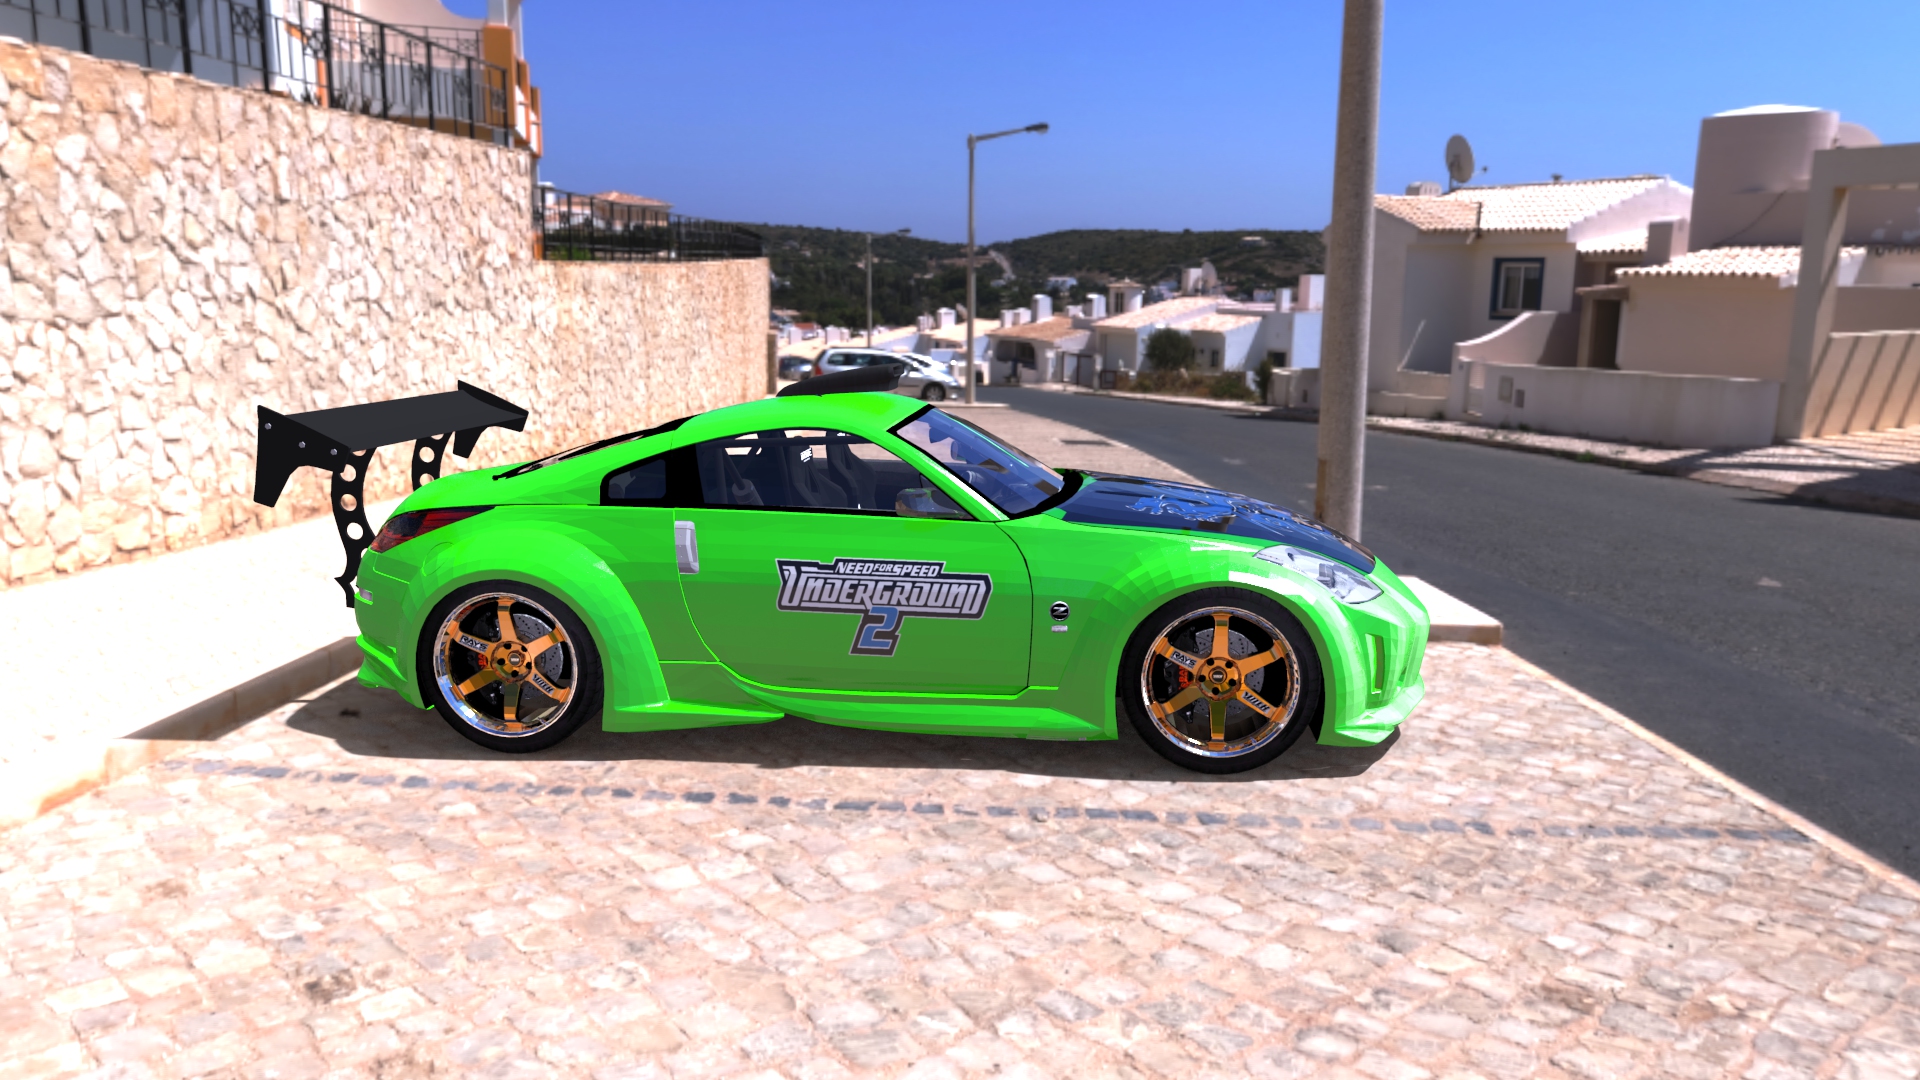 Nissan 350Z Need For Speed Video Games Vehicle Car Nissan Fairlady Z Nissan Side View Green Cars Str 1920x1080